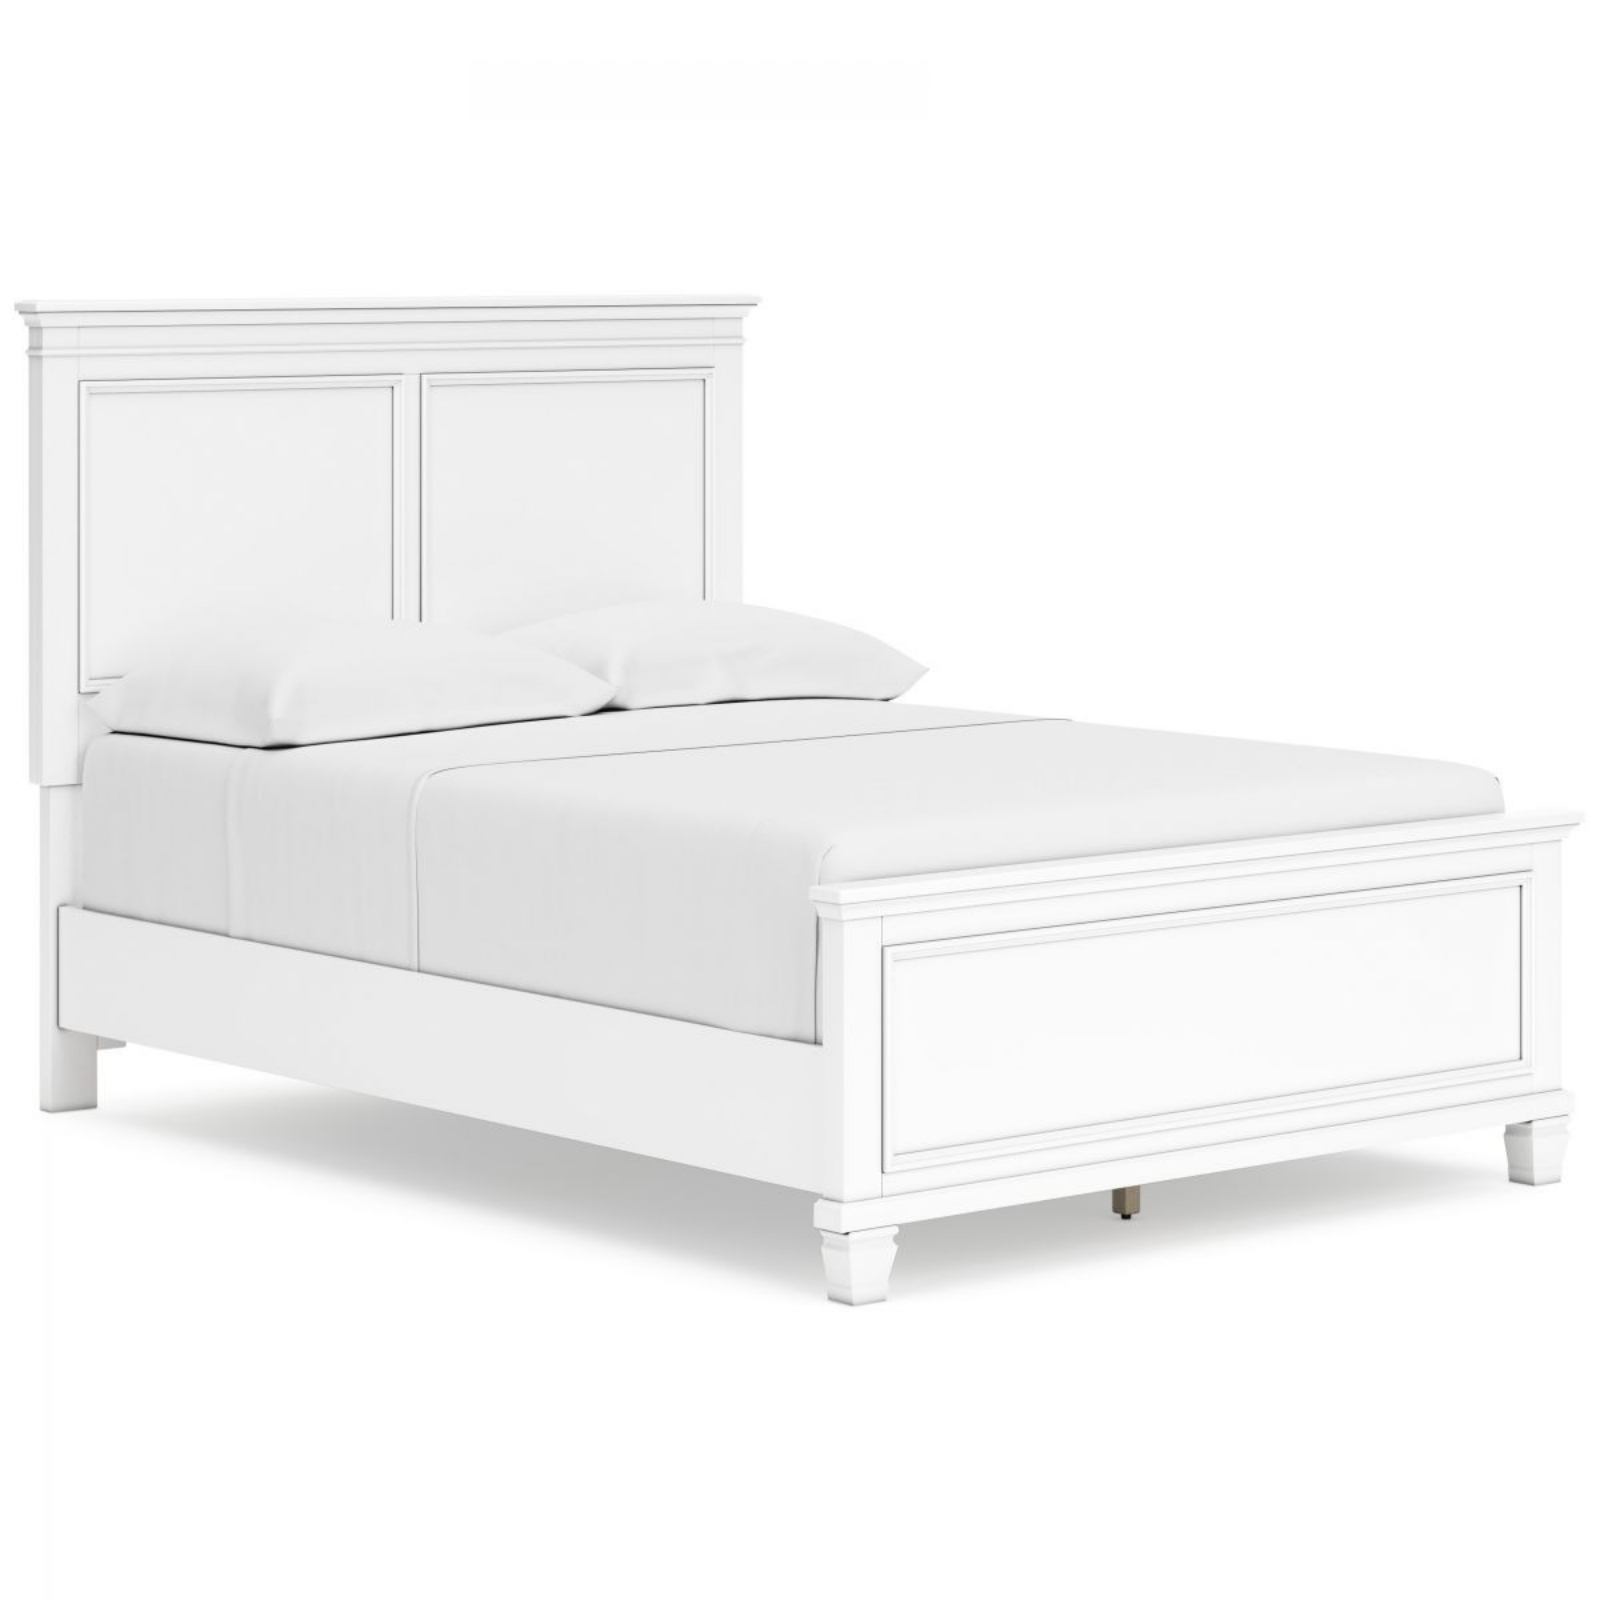 Picture of Fortman Full Size Bed